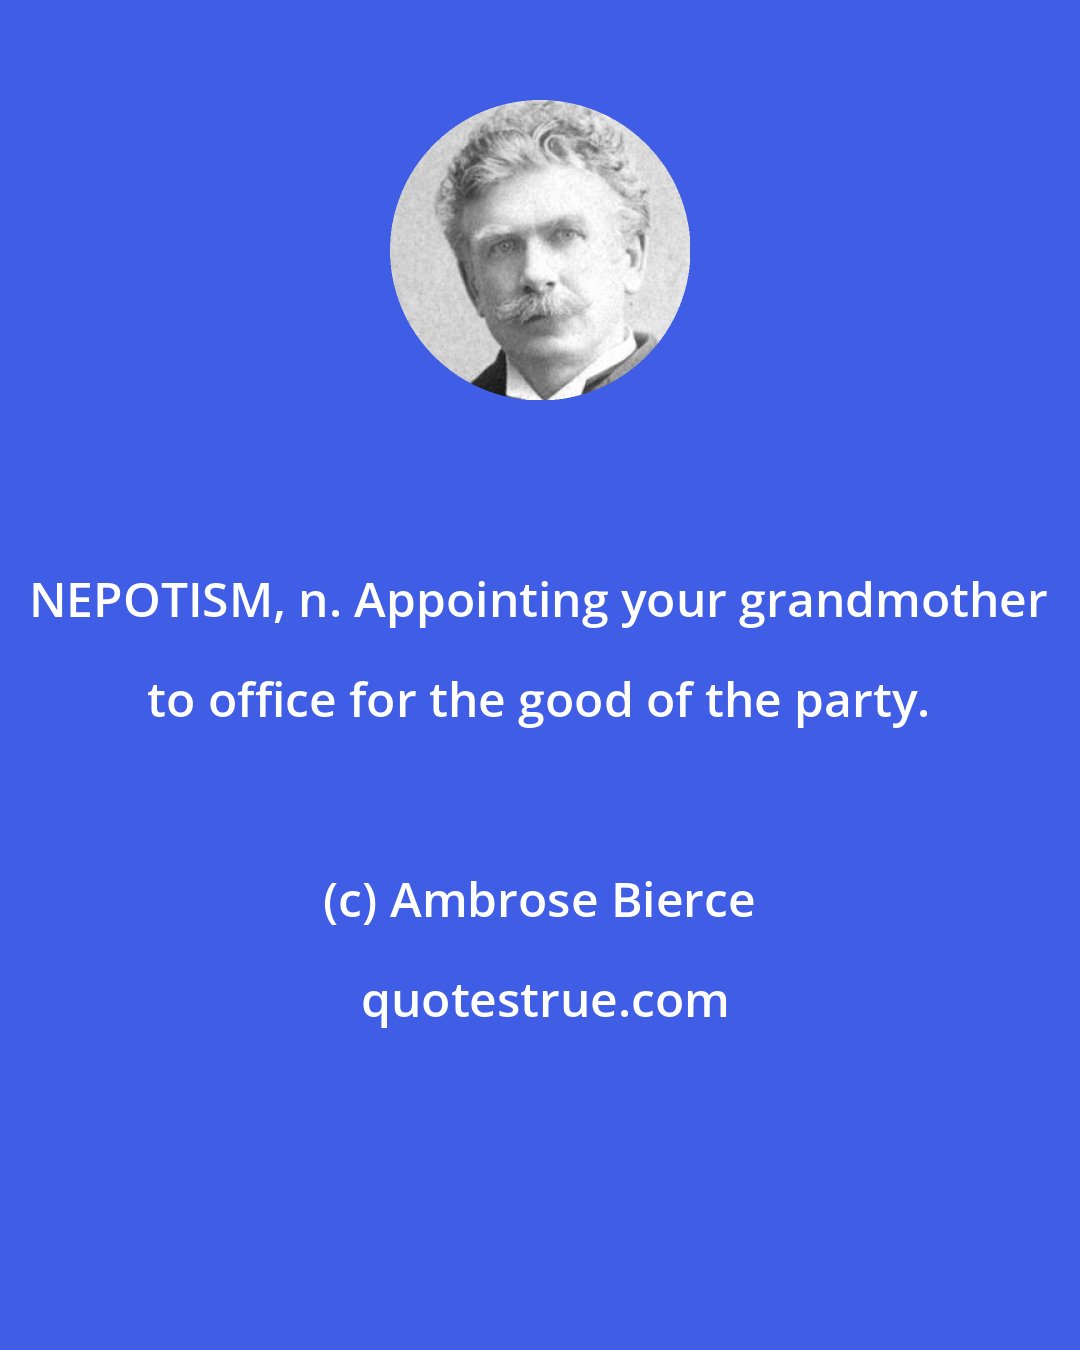 Ambrose Bierce: NEPOTISM, n. Appointing your grandmother to office for the good of the party.